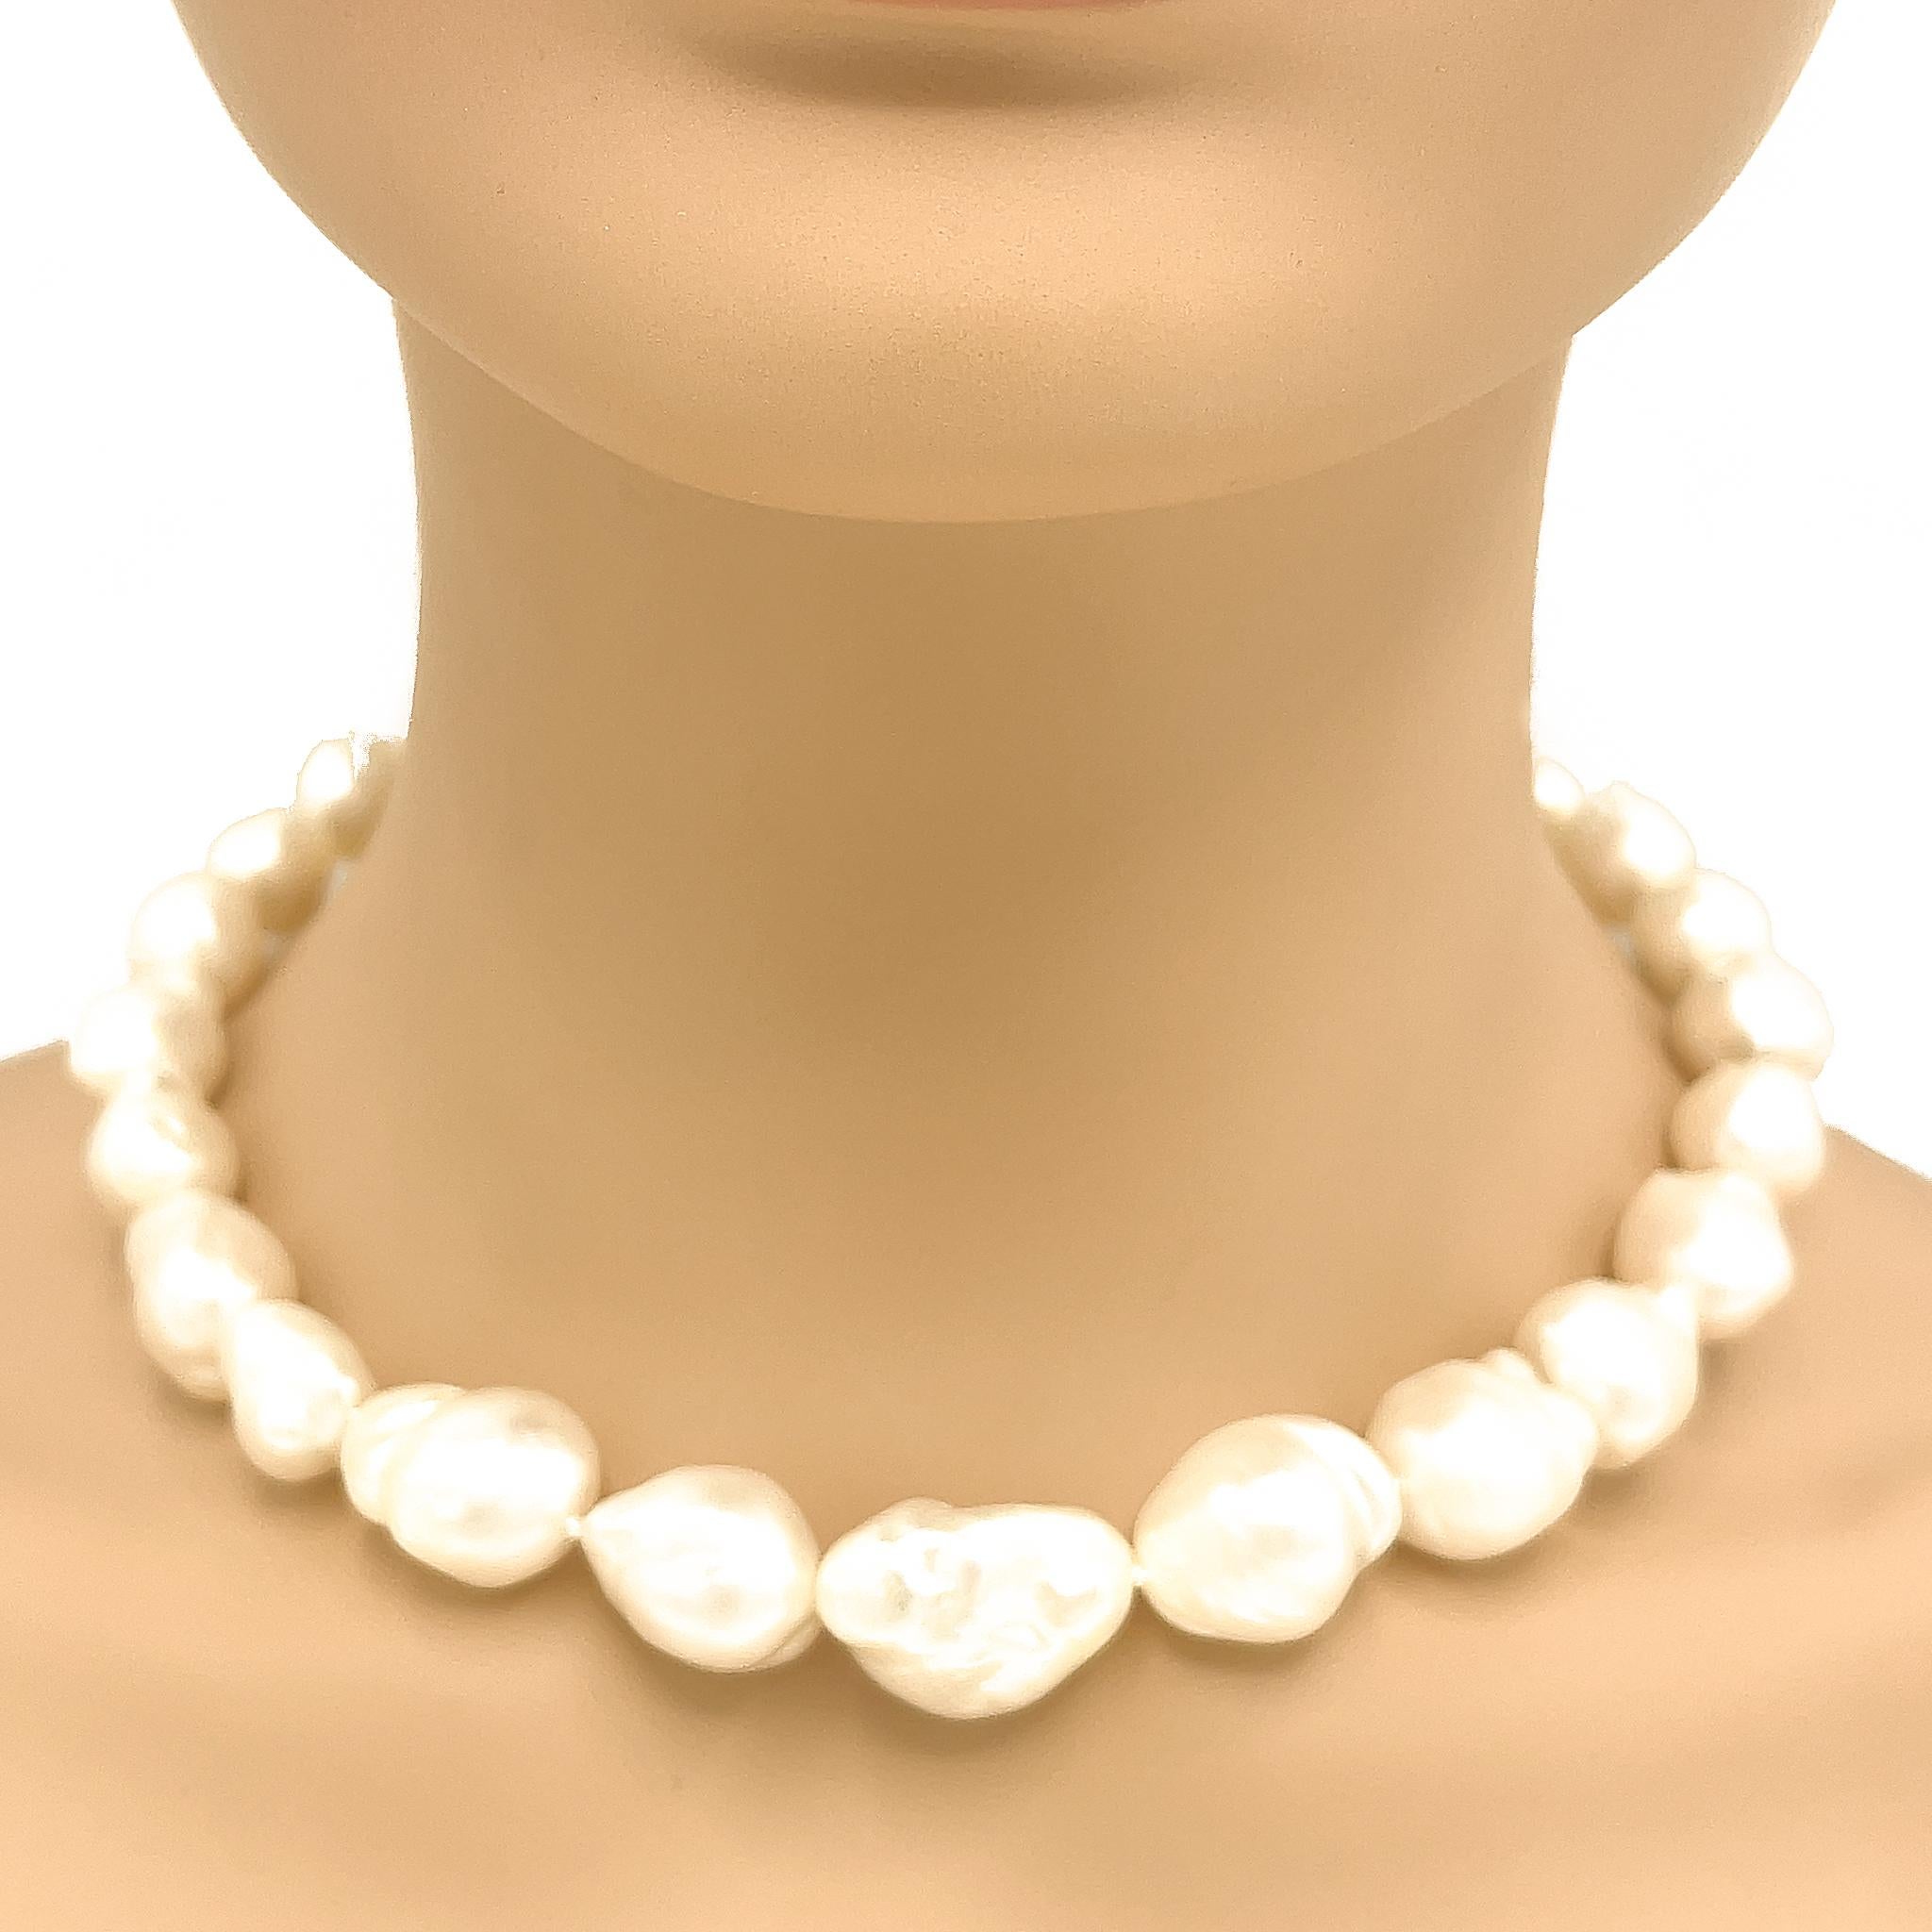 how much are baroque pearls worth